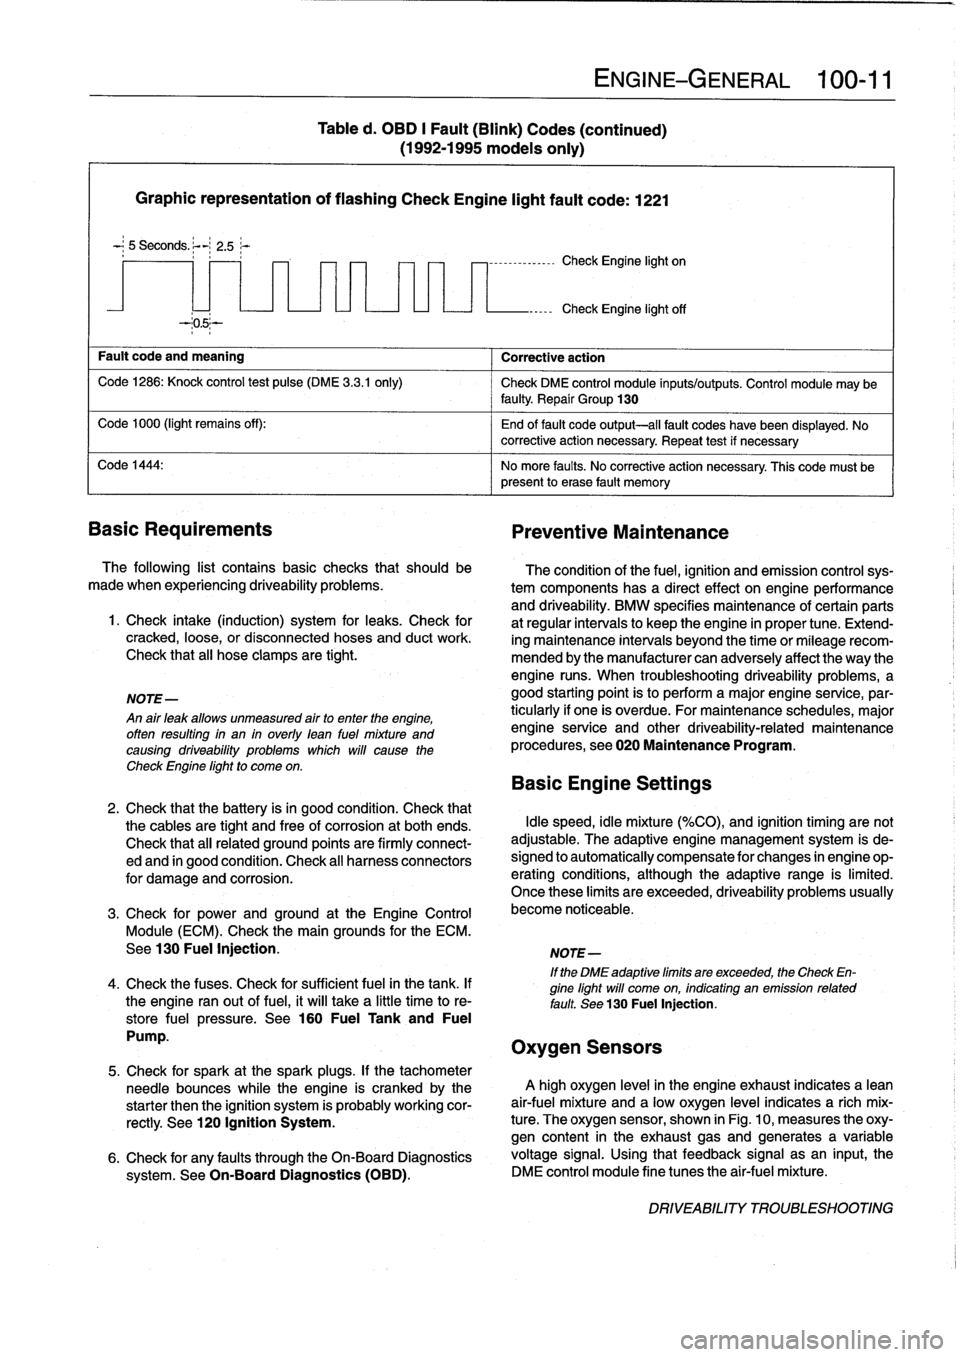 BMW 318i 1997 E36 Workshop Manual 
Graphic
representation
of
flashing
Check
Engine
light
fault
code
:
1221

-
;
5
Seconds
.
~-

	

2
.5;-

Fault
code
and
meaning

	

Corrective
action

Code
1286
:
Knock
control
test
pulse
(DME
3
.3
.1